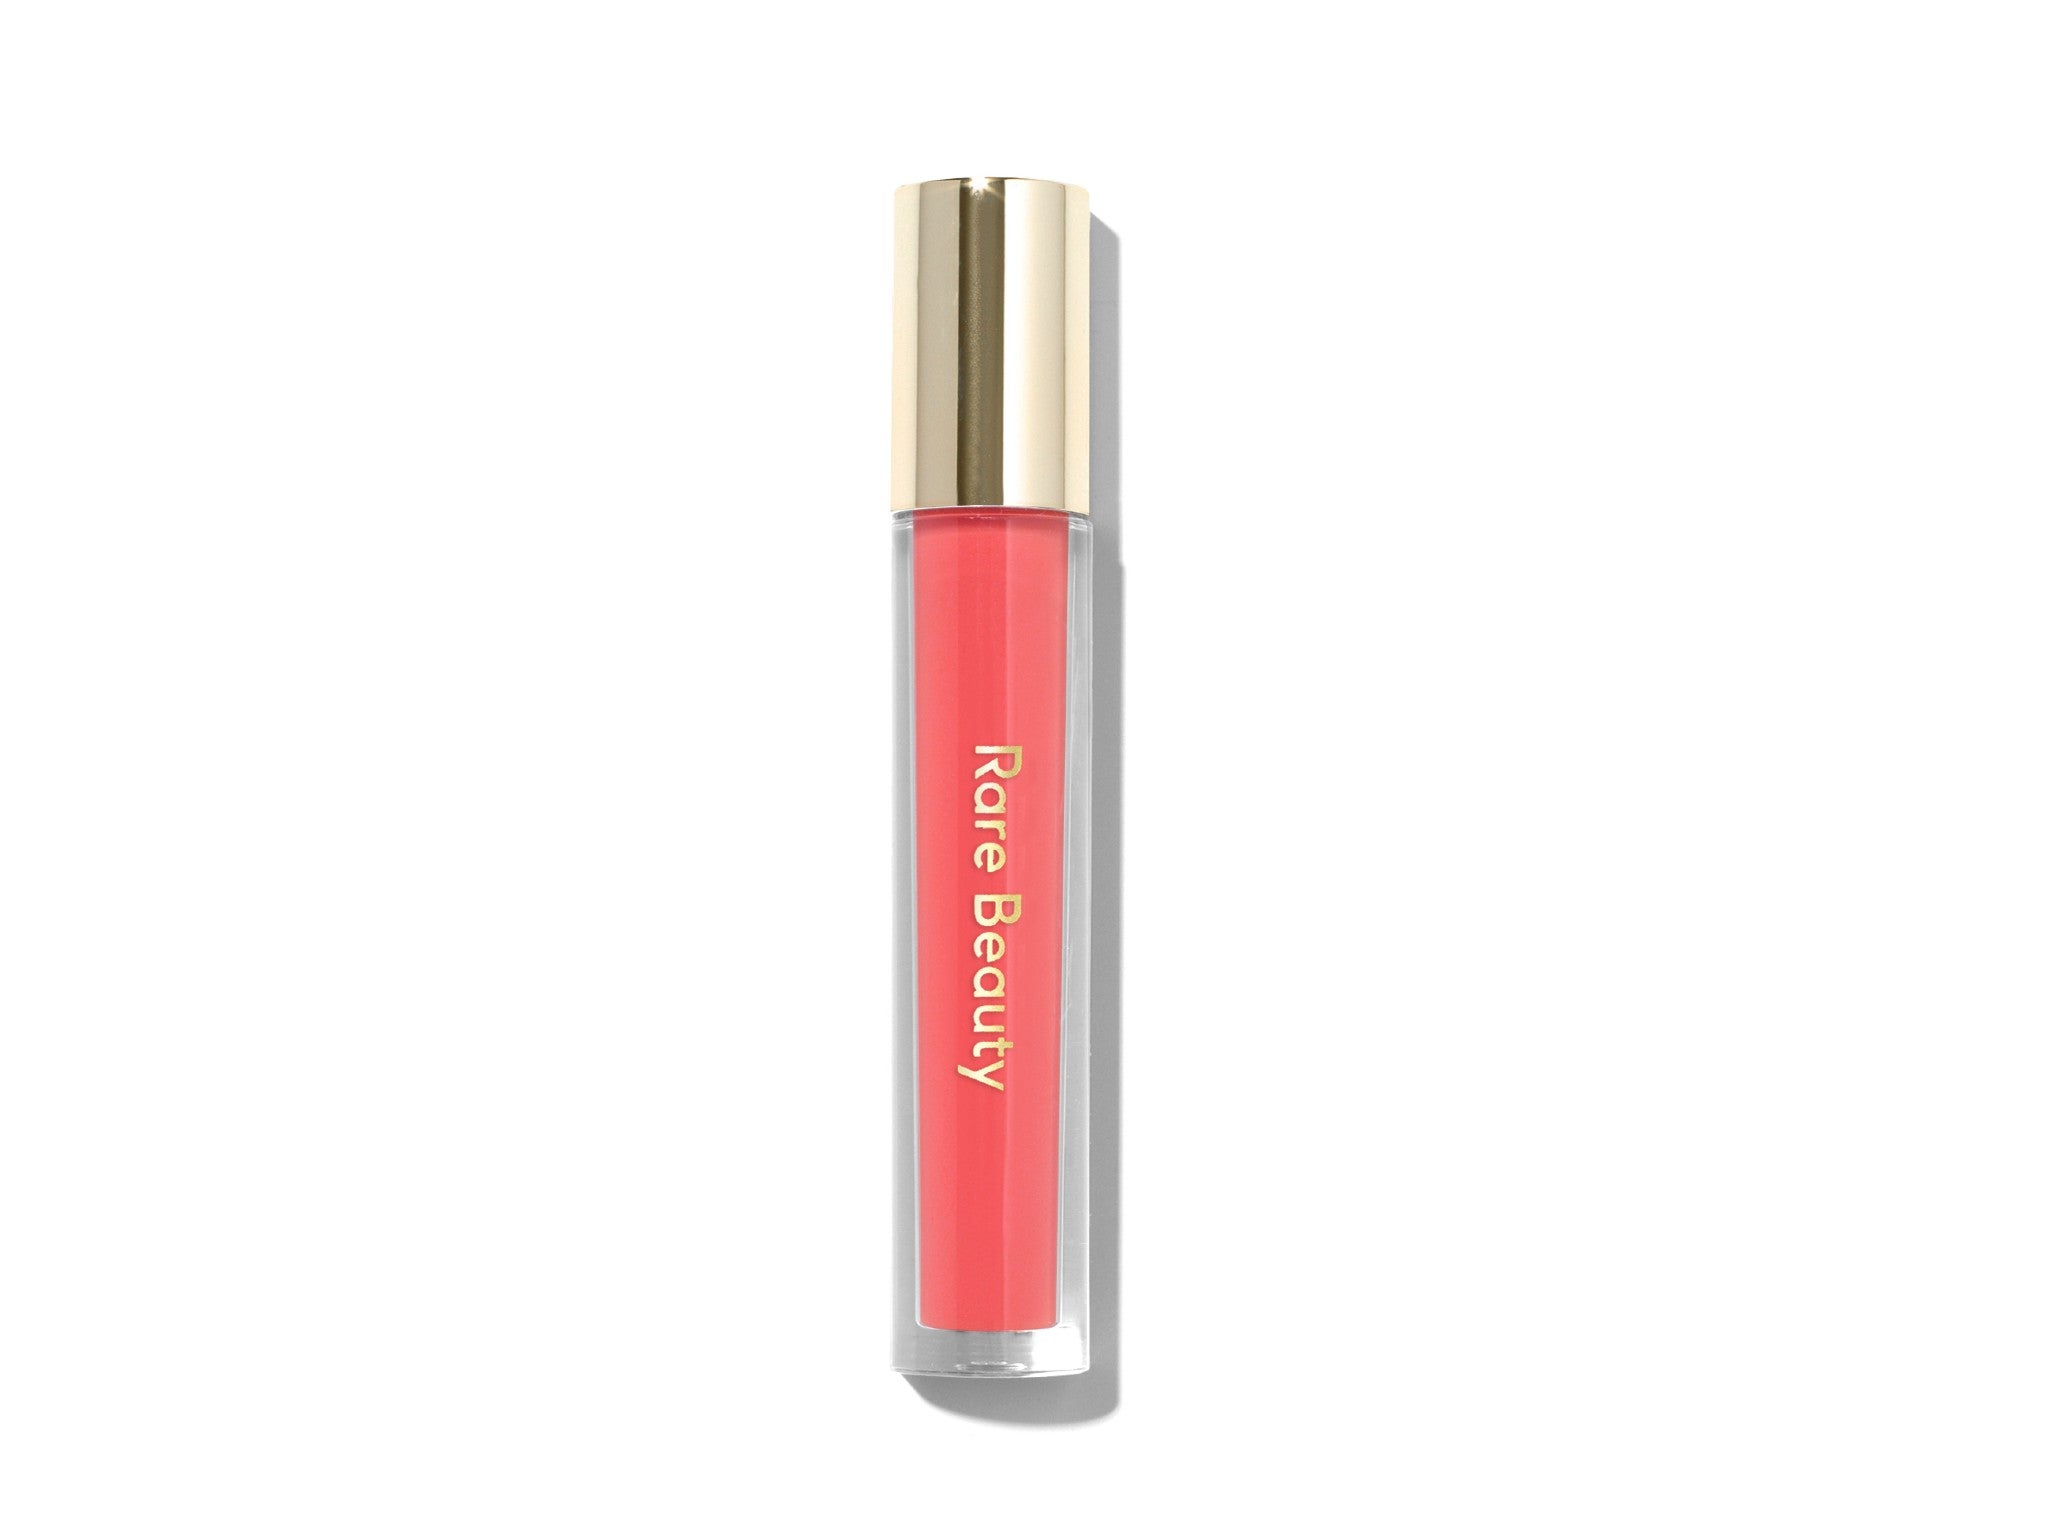 Rare Beauty stay vulnerable glossy lip balm indybest.jpg